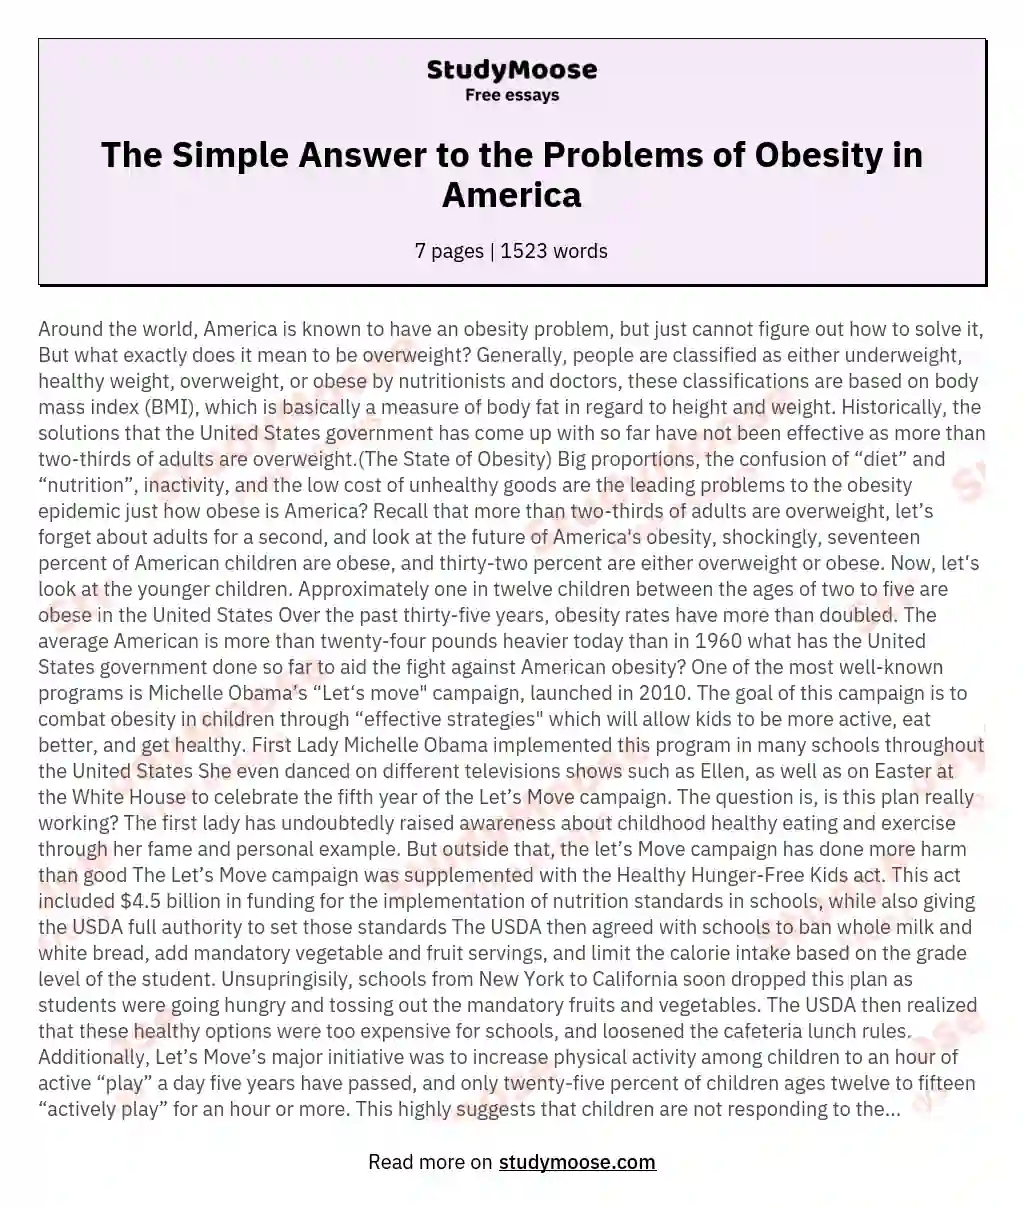 The Simple Answer to the Problems of Obesity in America essay